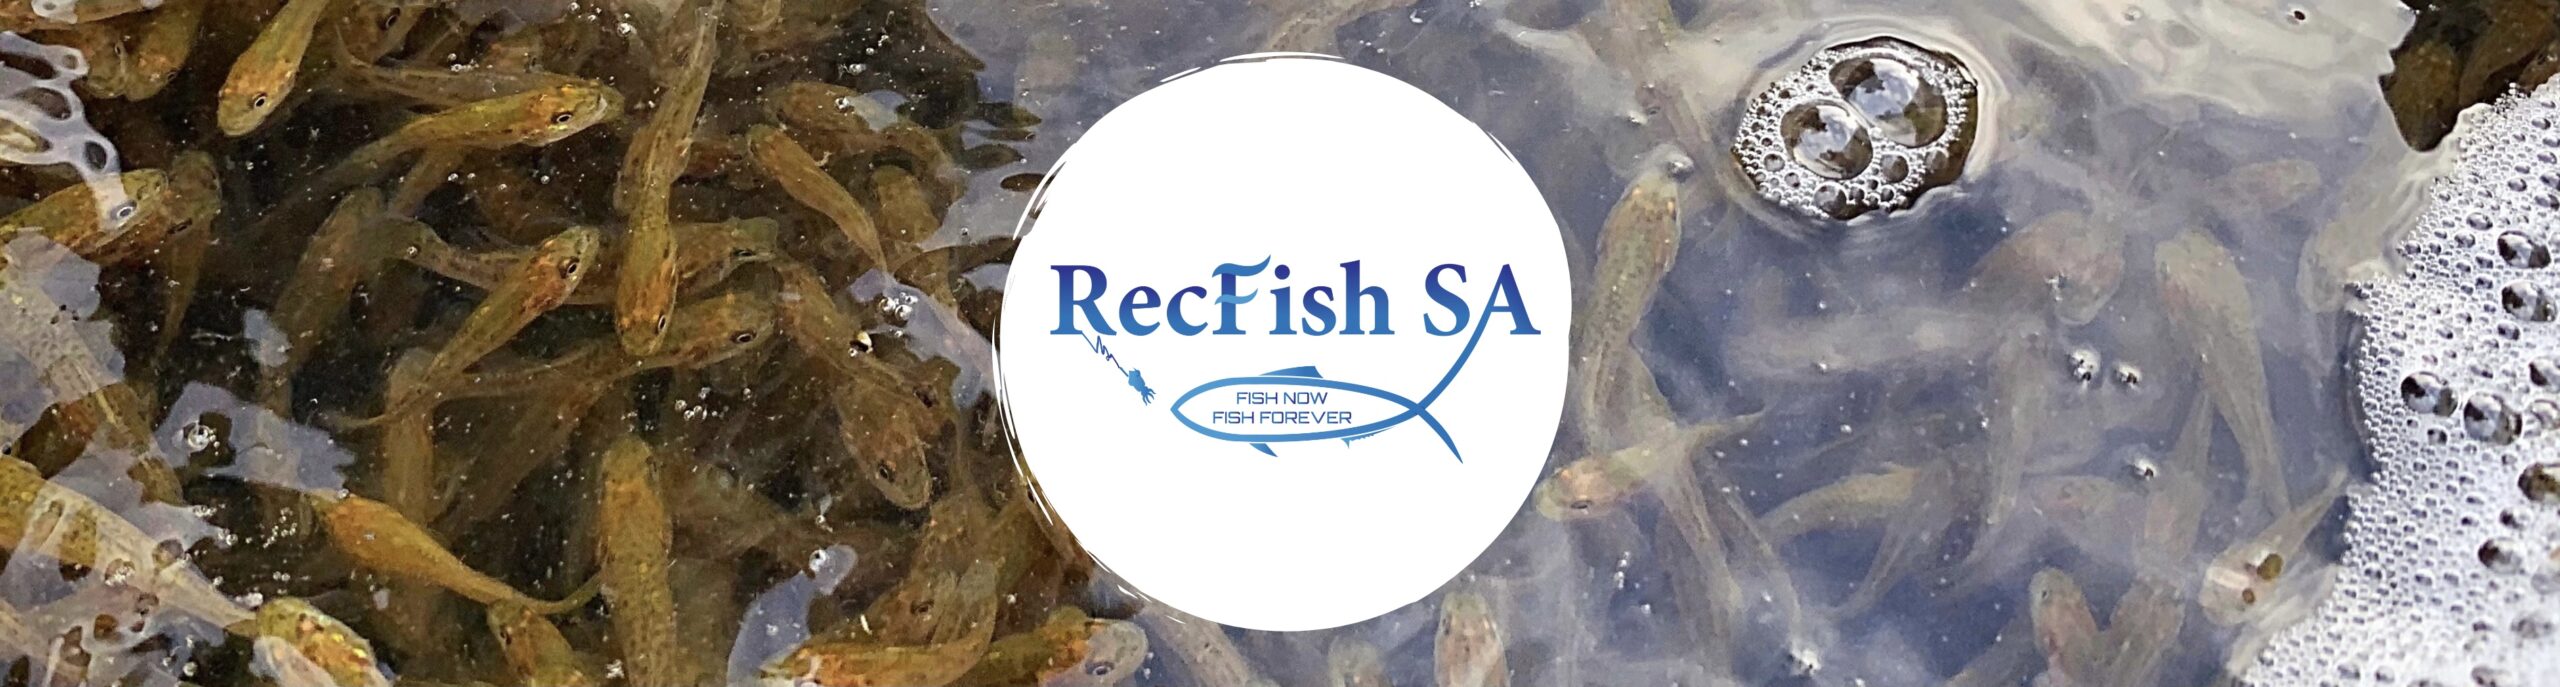 RecFish SA set to propose licences in South Australia but state government  won't rush - ABC News